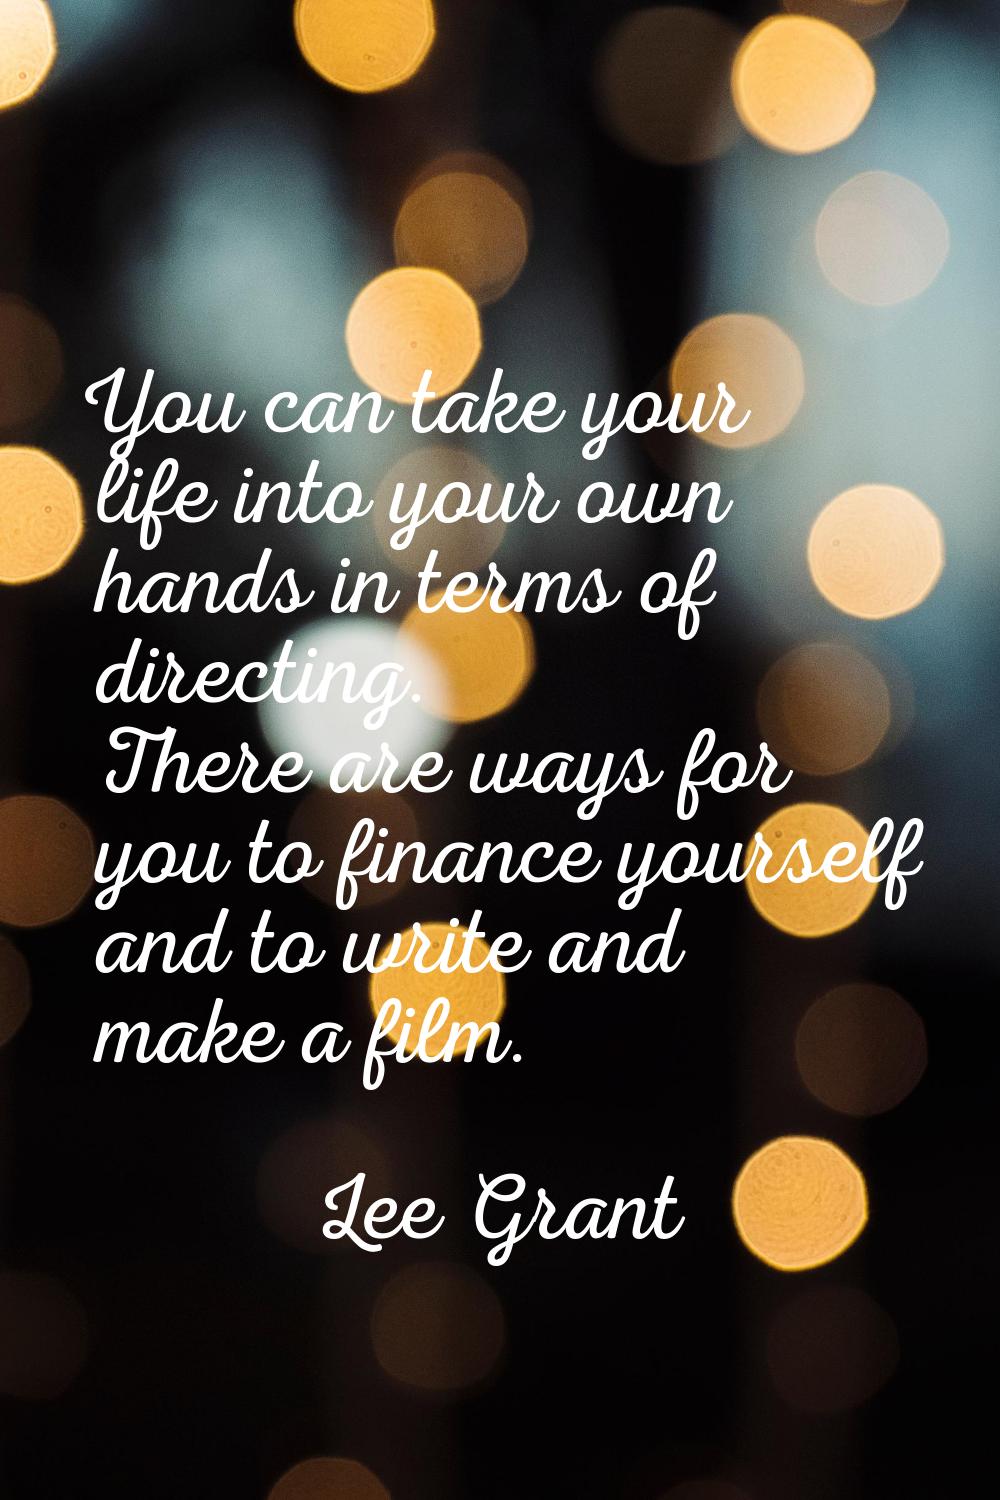 You can take your life into your own hands in terms of directing. There are ways for you to finance